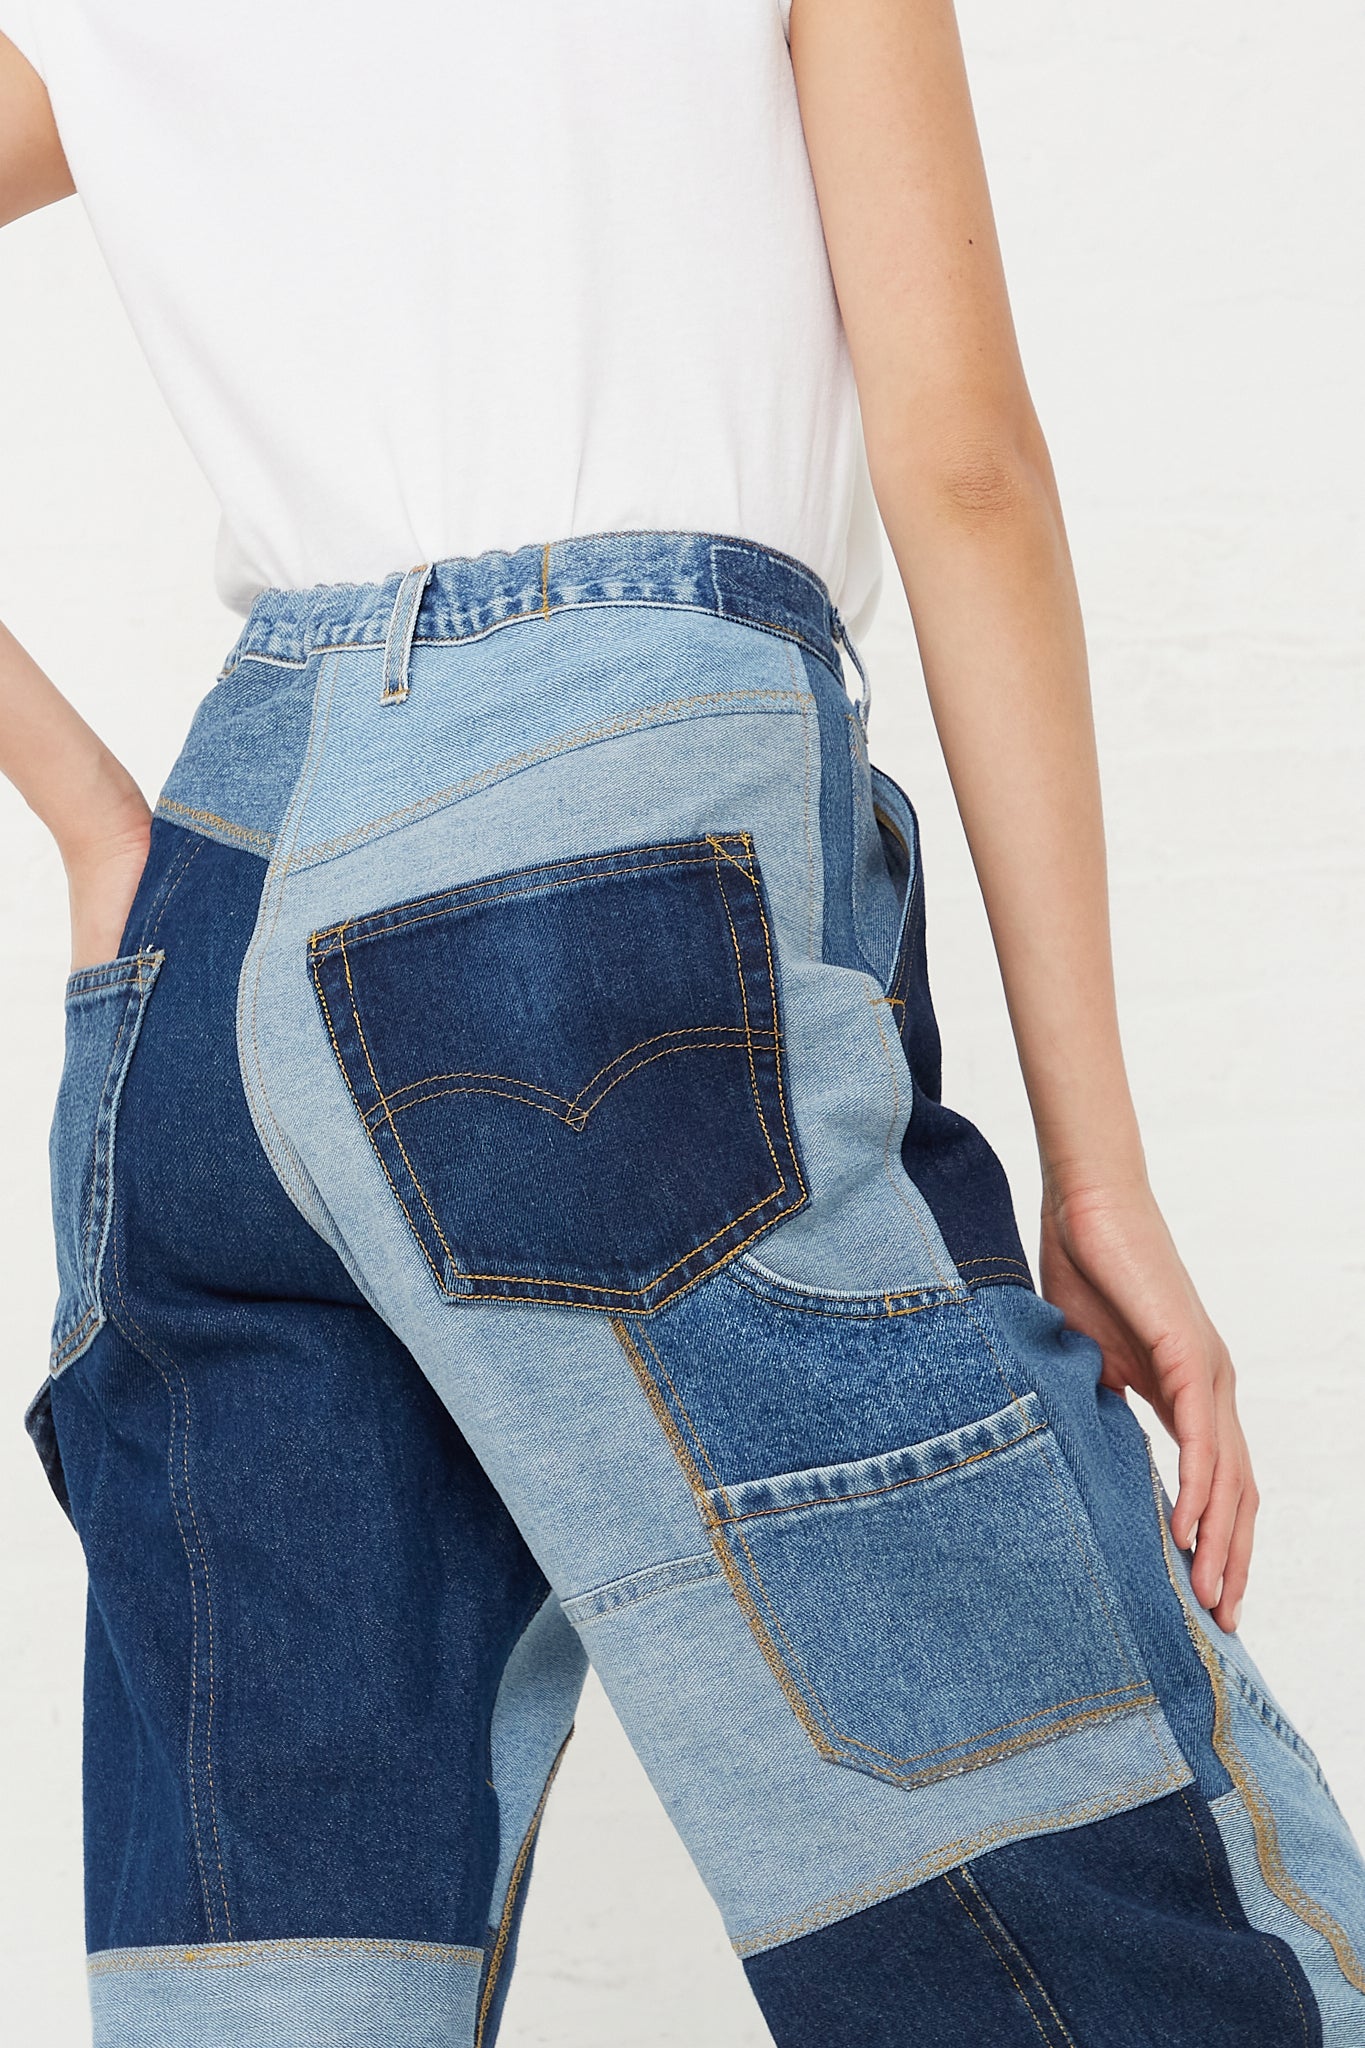 WildRootz - Reworked Jeans in Blue Variation B - M | Oroboro Store ...